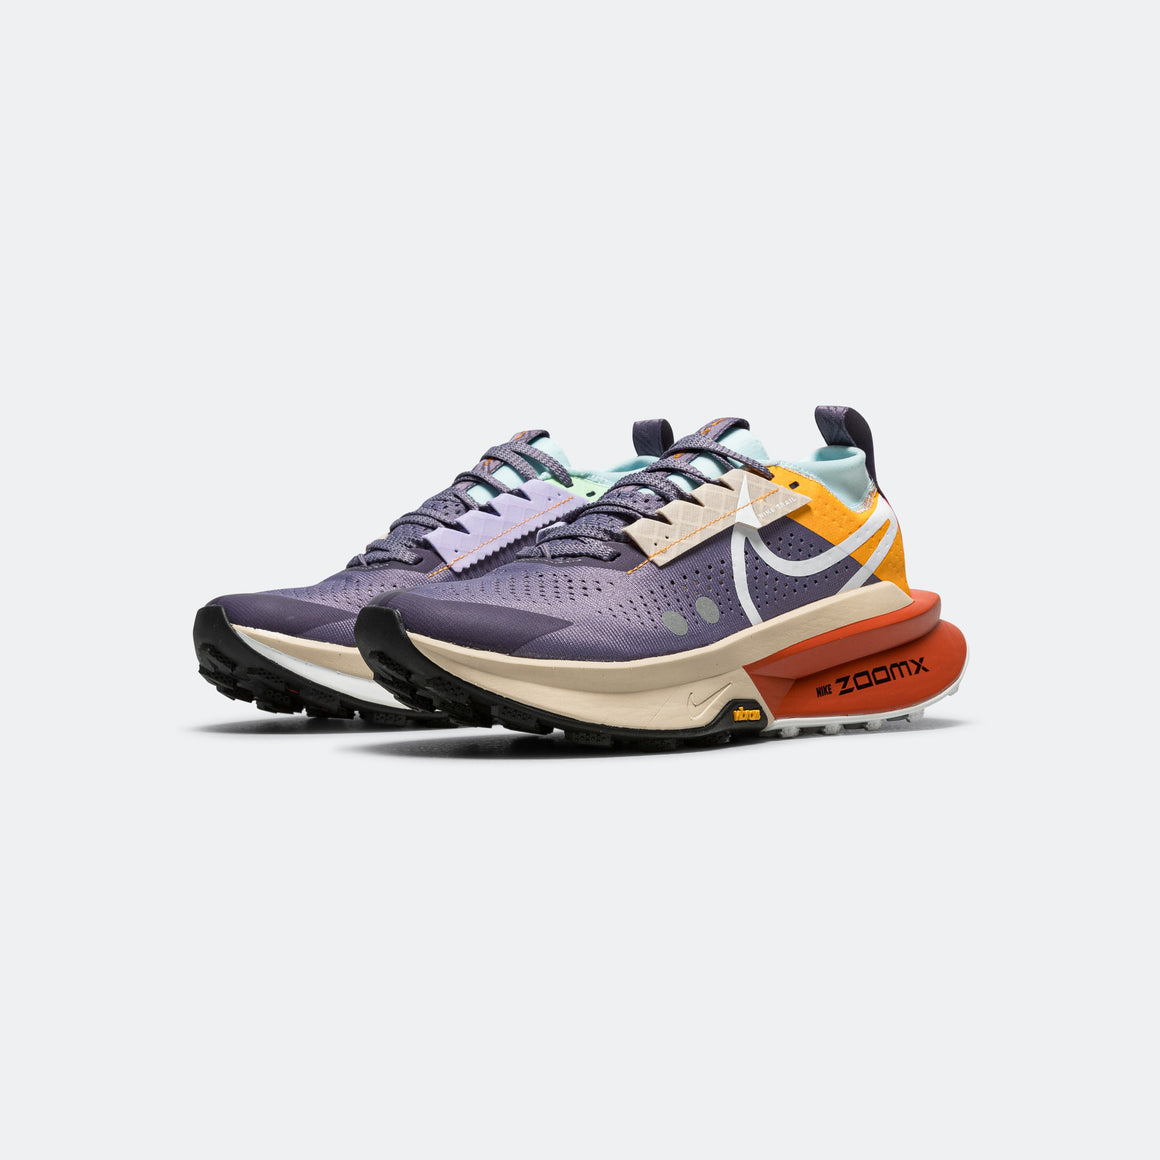 Nike - Womens ZoomX Zegama Trail 2 - Daybreak/Cosmic Clay - Up There Athletics